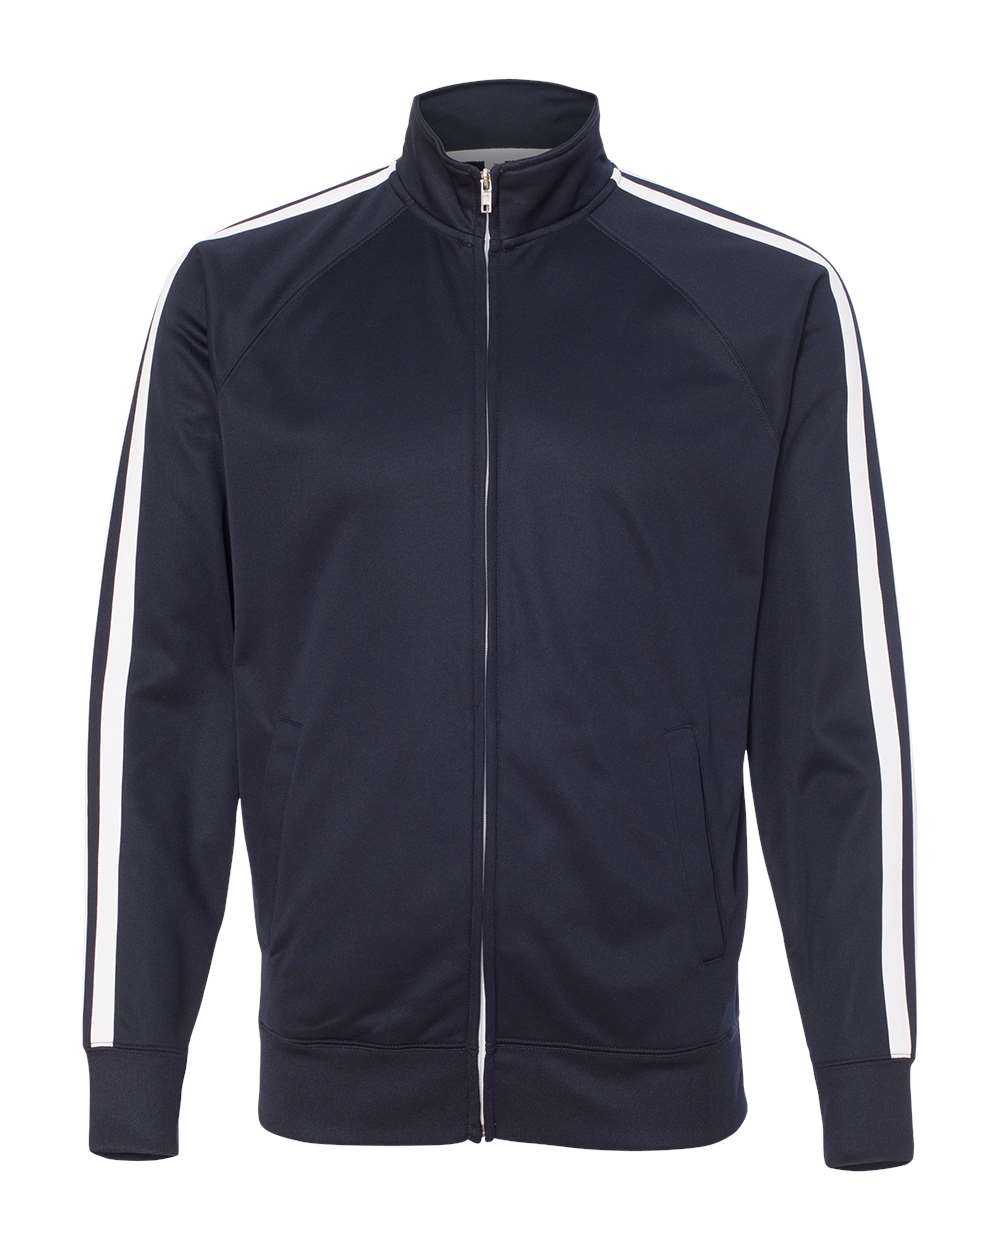 Independent Trading Co. - Lightweight Poly-Tech Full-Zip Track Jacket